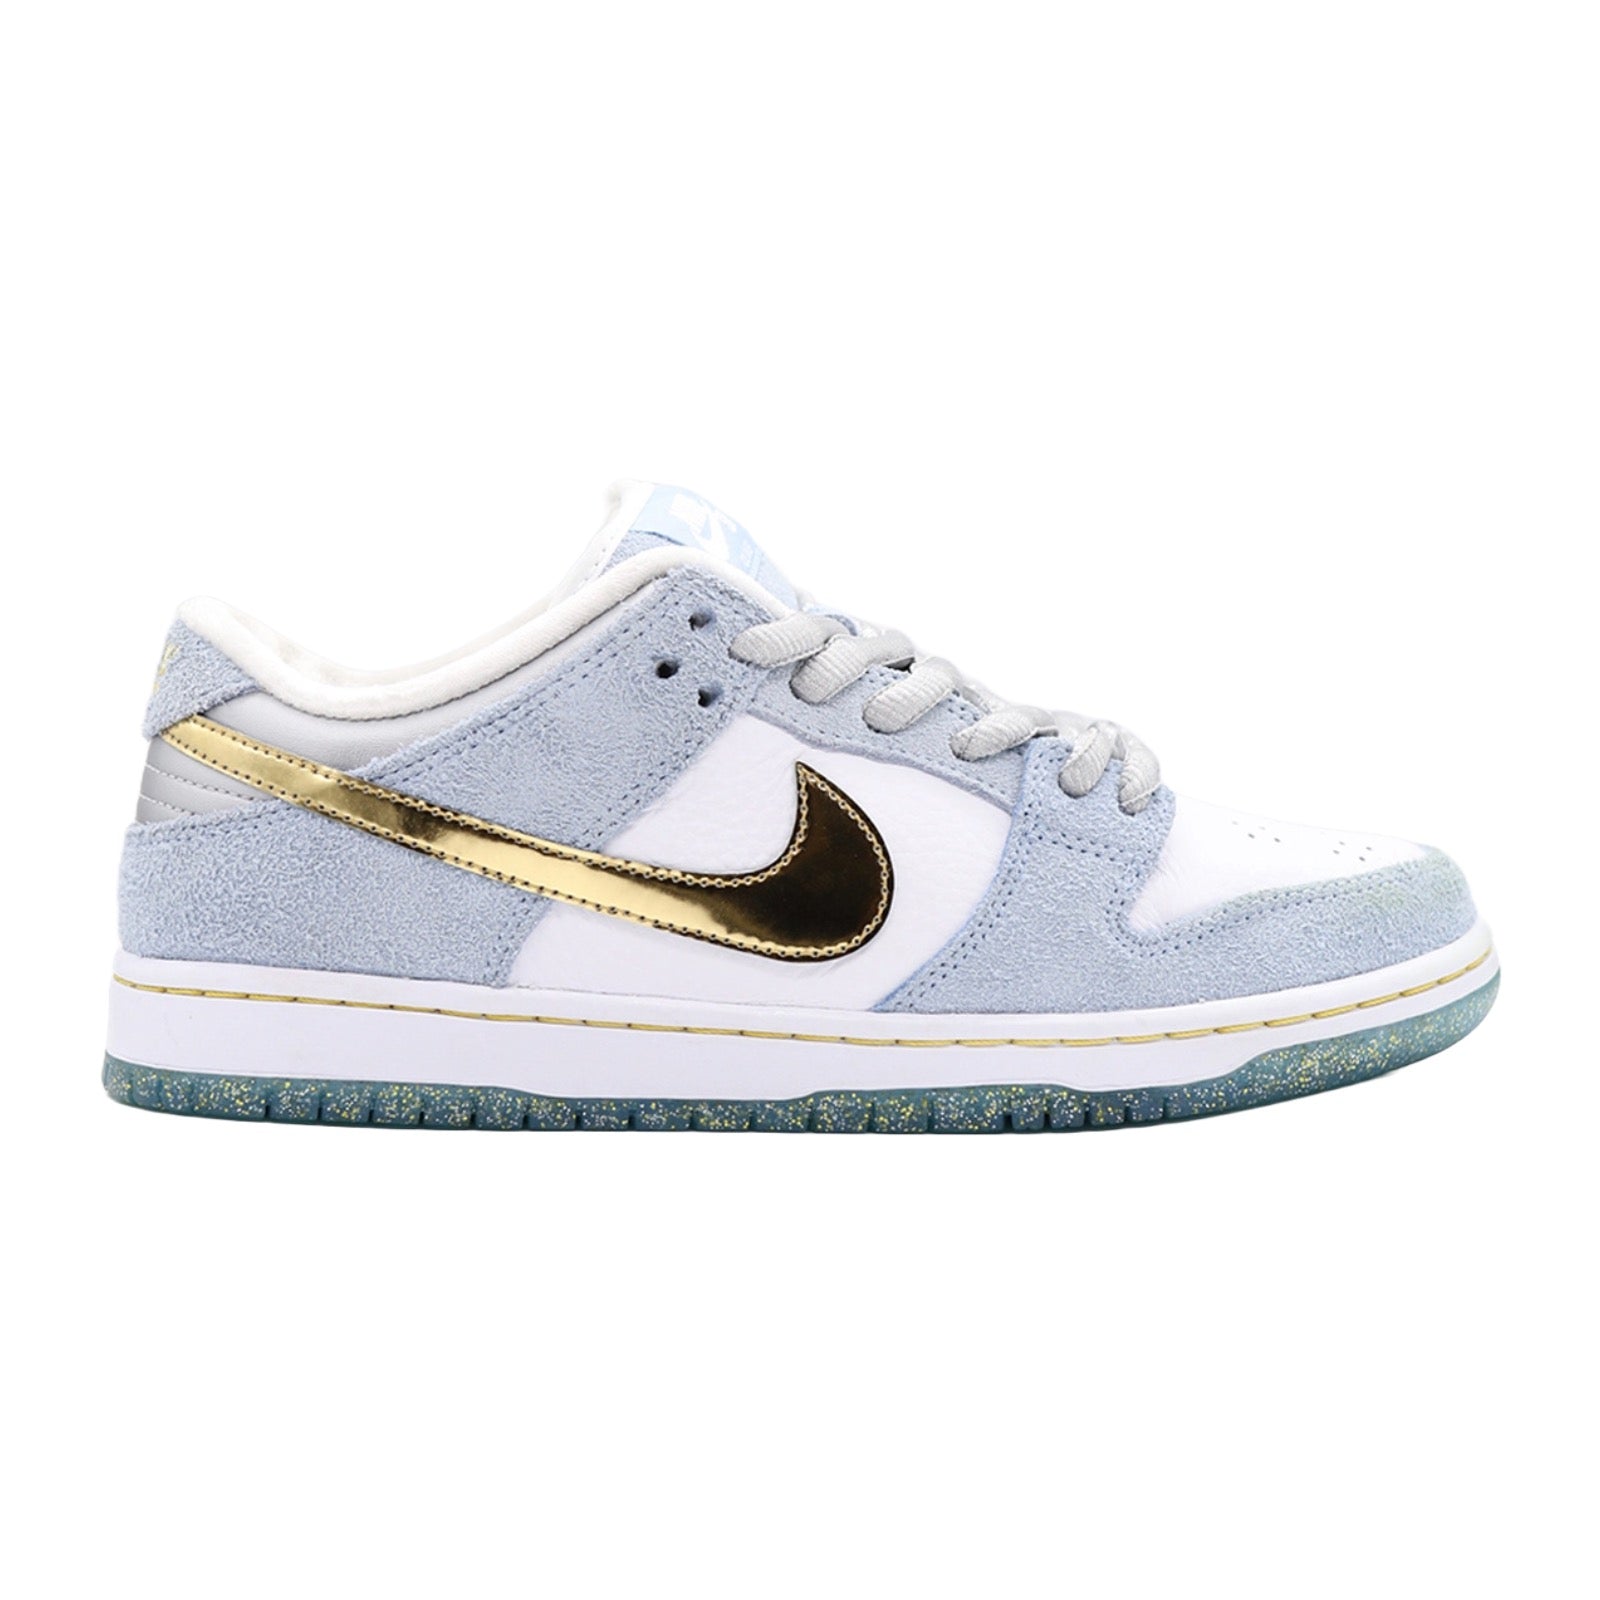 Nike SB Dunk Low, Sean Cliver Holiday Special